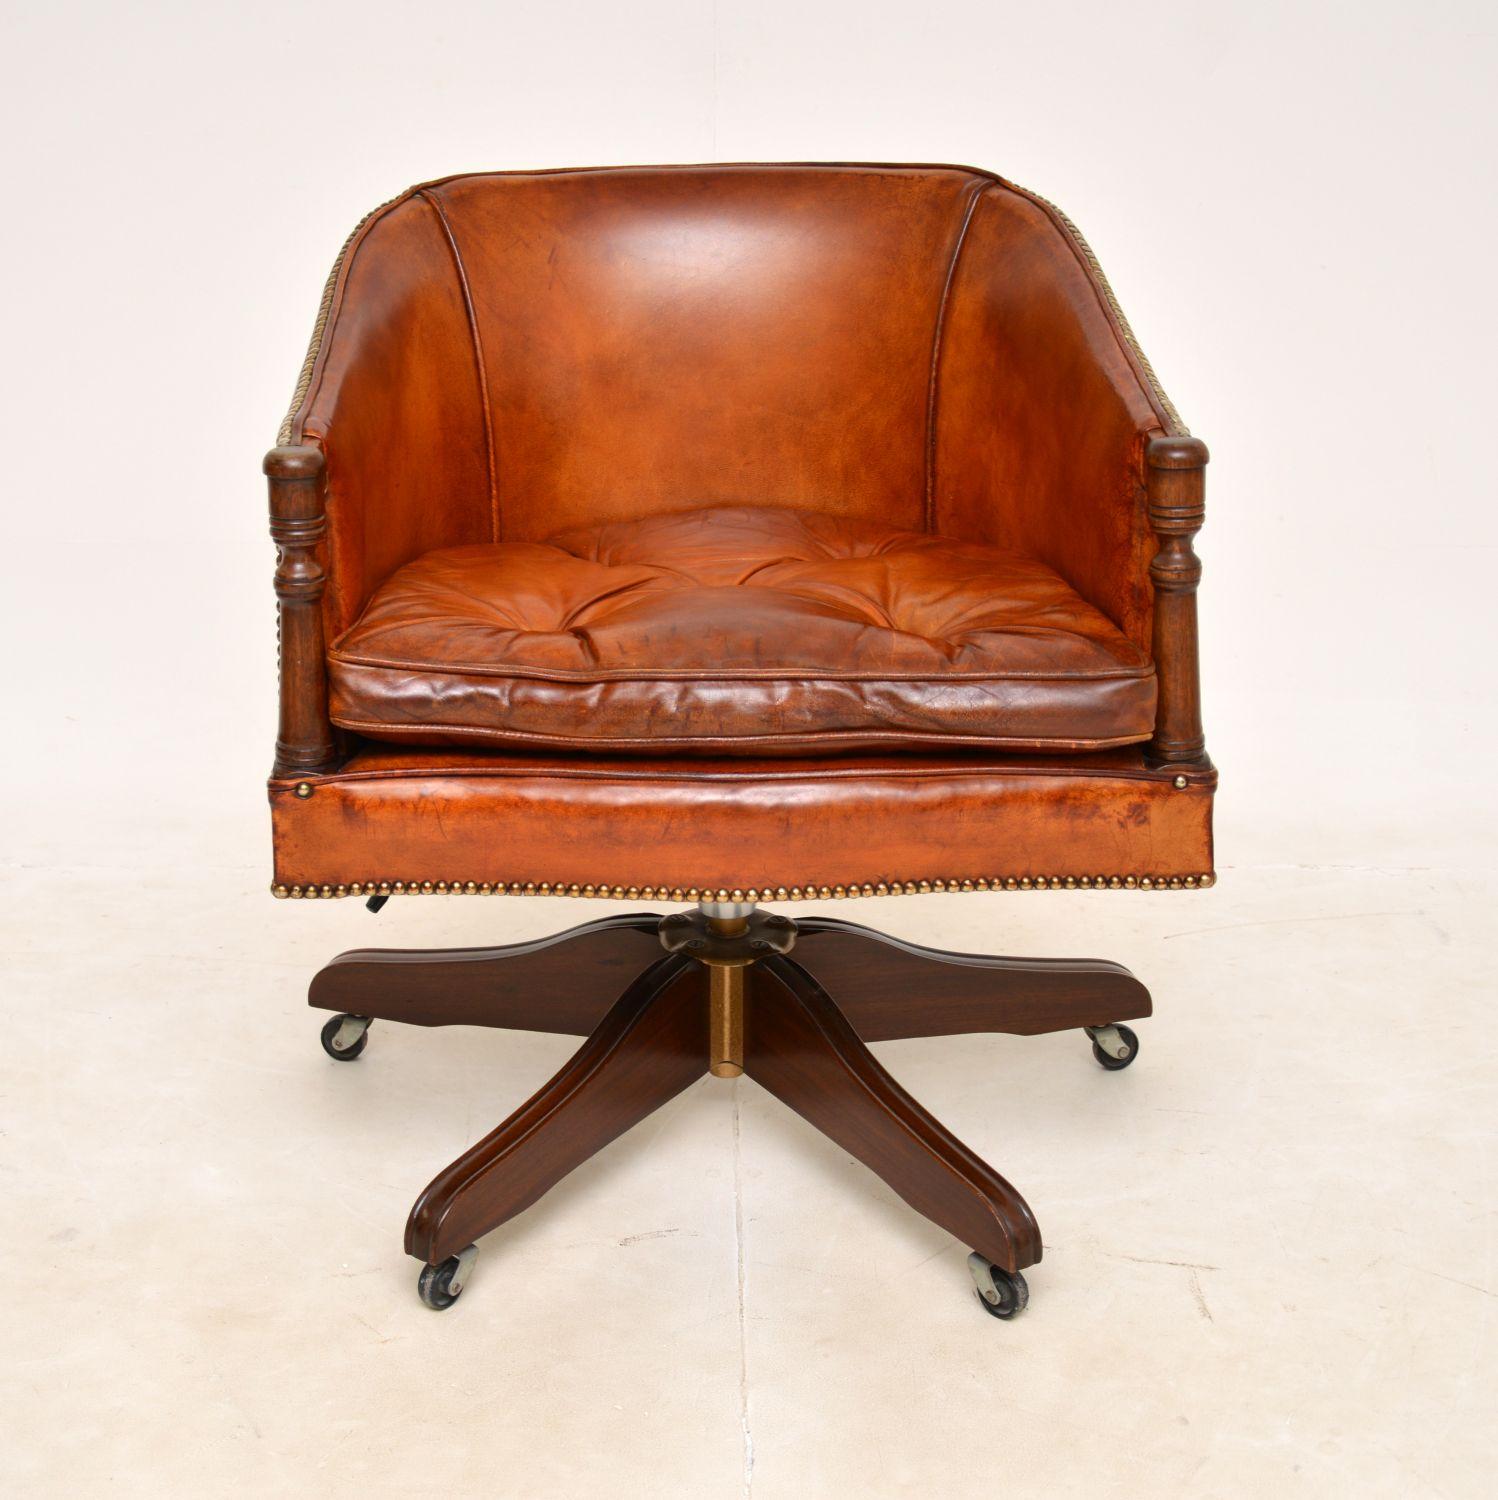 A smart and very well made antique leather swivel desk chair in the Georgian style. This was made in England, it dates from around the 1950-1960s.

It is of fantastic quality and is very comfortable. The tub shaped frame has studded leather, it